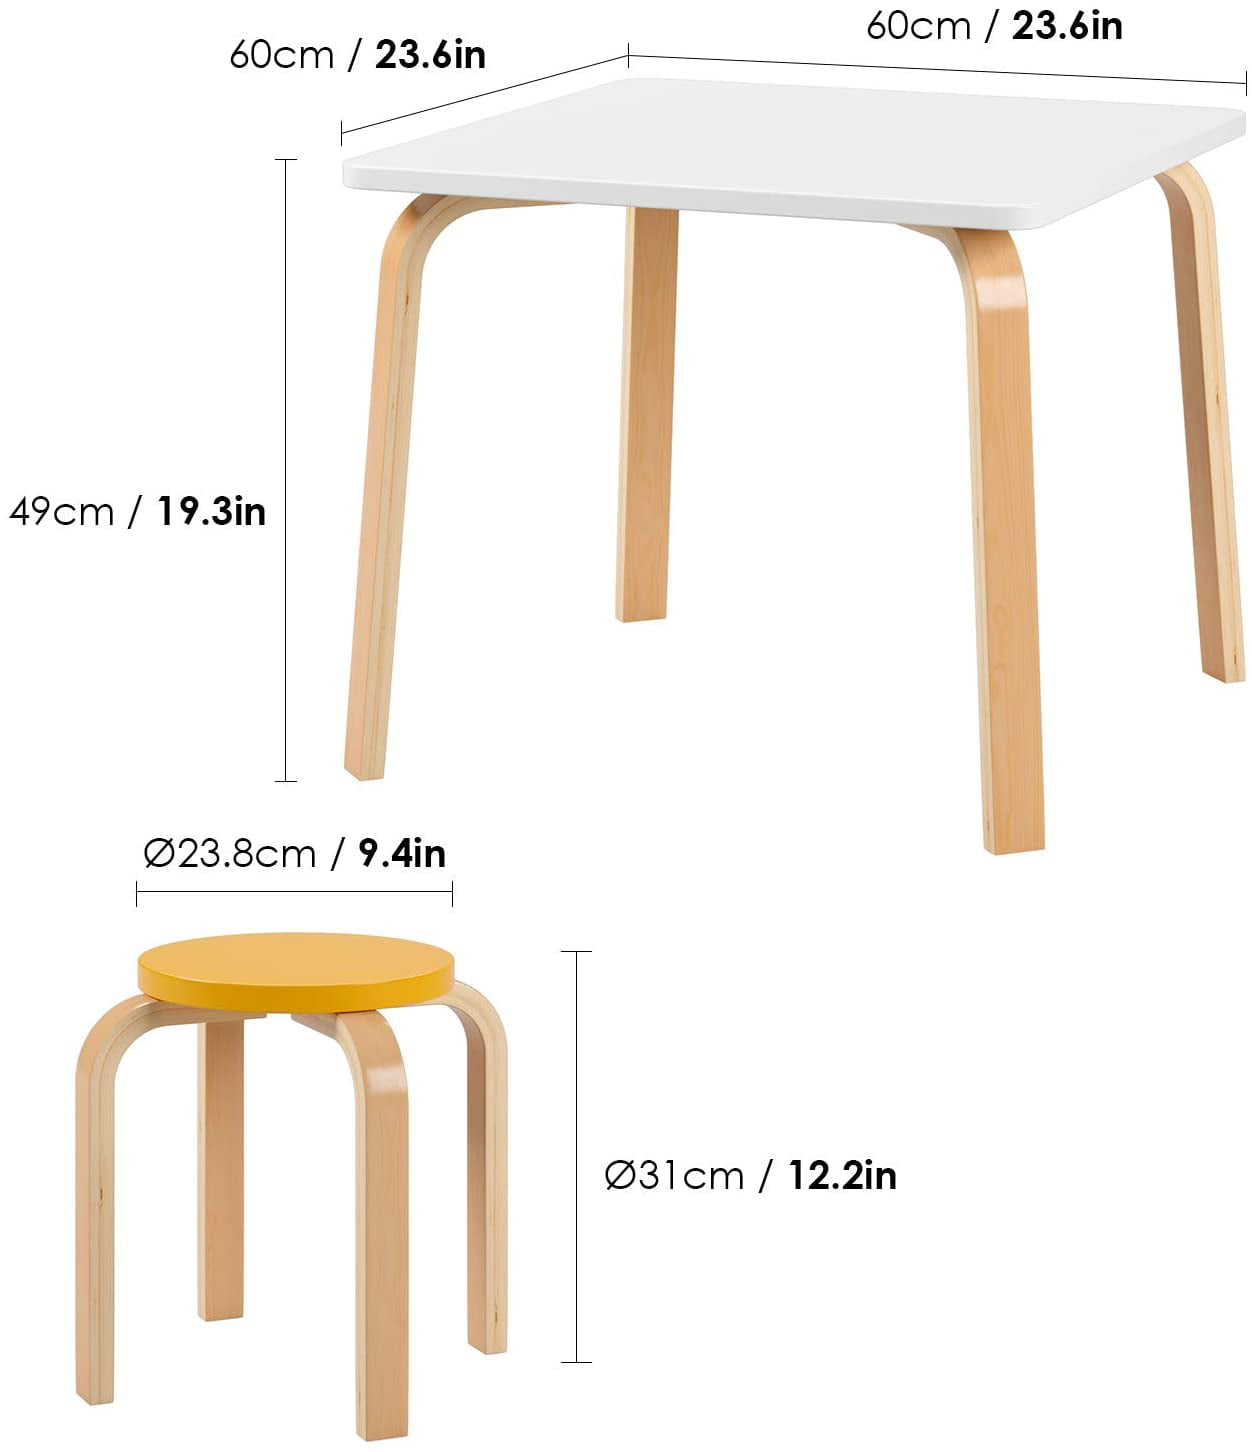 Details about   5x Classroom Stools Chairs for Kids 12.2'' Length Assorted Color Students Used 